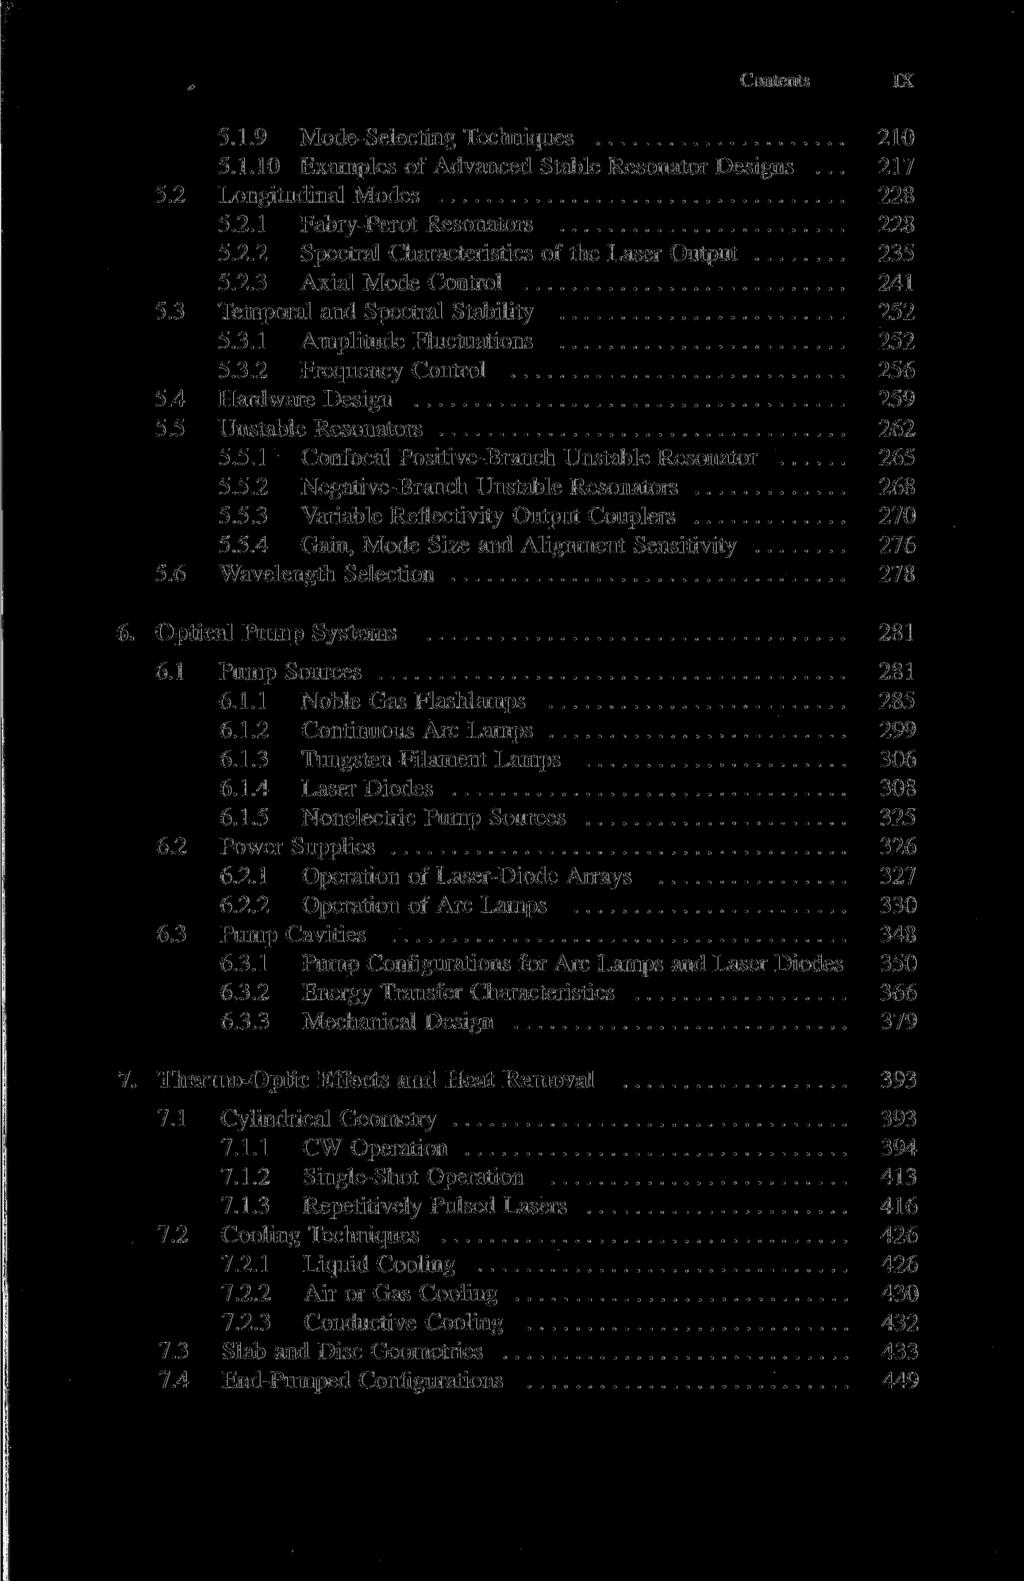 , Contents IX 5.1.9 Mode-Selecting Techniques 210 5.1.10 Examples of Advanced Stable Resonator Designs... 217 5.2 Longitudinal Modes 228 5.2.1 Fabry-Perot Resonators 228 5.2.2 Spectral Characteristics of the Laser Output 235 5.